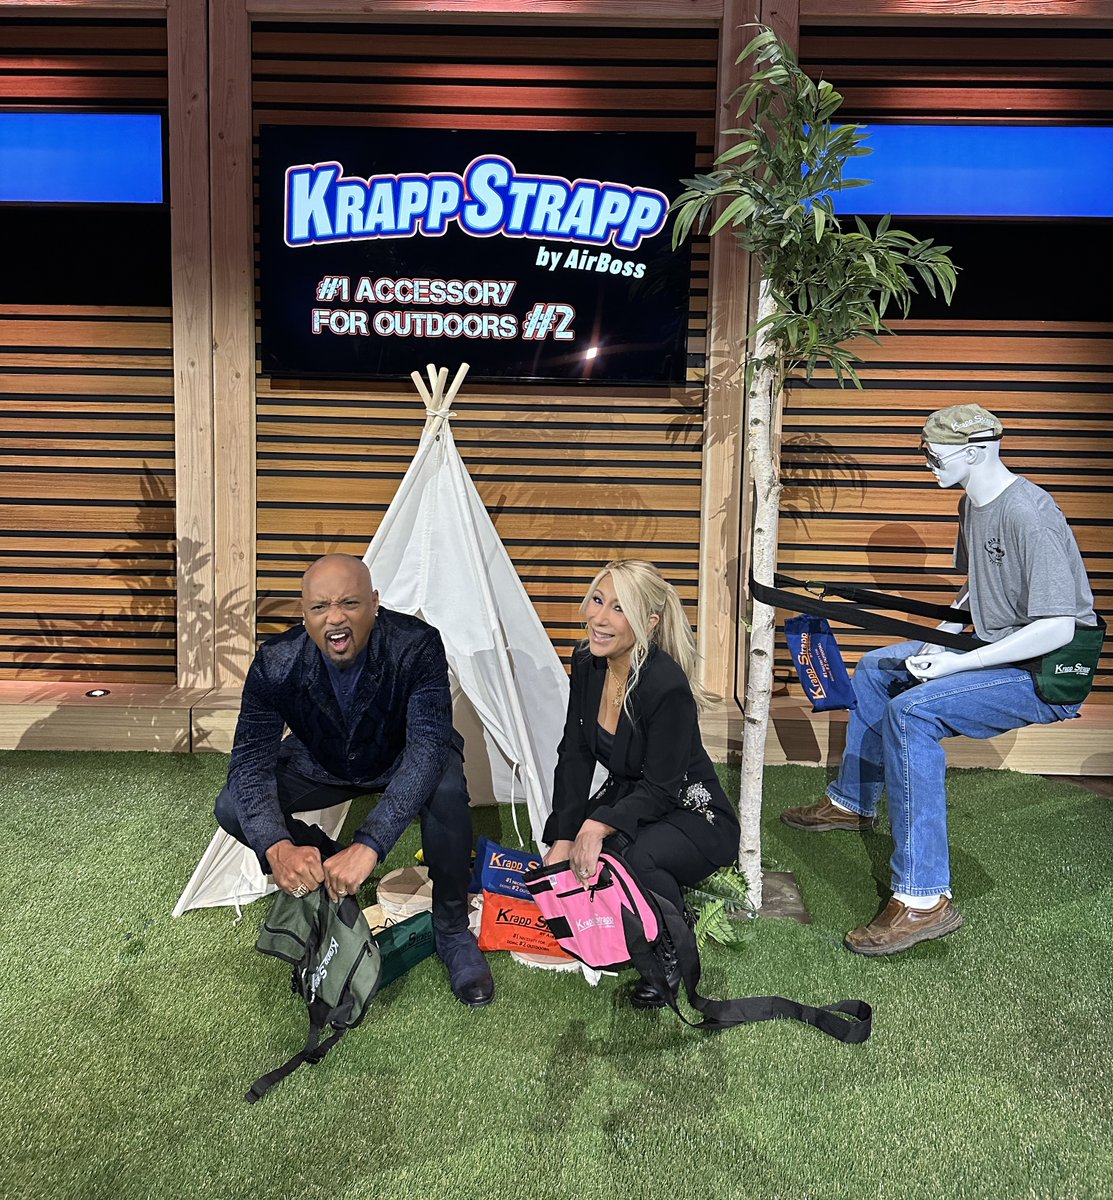 The #KrappStrapp is the #1 necessity for doing #2 outdoors! Perfect gift to give to anyone you know who is ever in the outdoors…this is a real lifesaver! Special #SharkTank discount here: bit.ly/3QmMghX